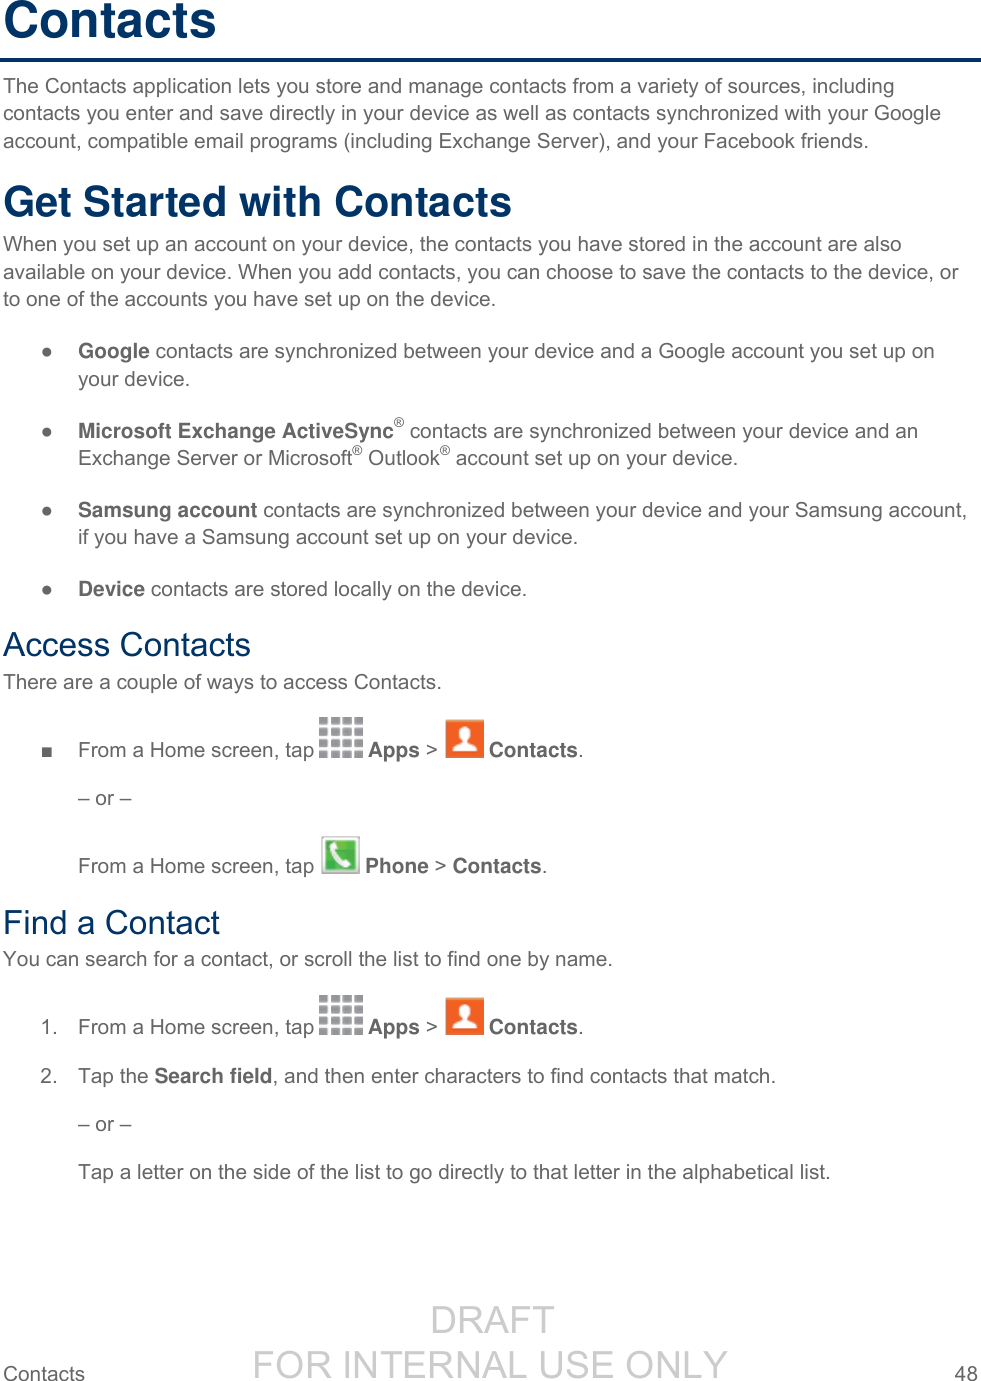                  DRAFT FOR INTERNAL USE ONLY Contacts  48   Contacts The Contacts application lets you store and manage contacts from a variety of sources, including contacts you enter and save directly in your device as well as contacts synchronized with your Google account, compatible email programs (including Exchange Server), and your Facebook friends. Get Started with Contacts When you set up an account on your device, the contacts you have stored in the account are also available on your device. When you add contacts, you can choose to save the contacts to the device, or to one of the accounts you have set up on the device. ● Google contacts are synchronized between your device and a Google account you set up on your device. ● Microsoft Exchange ActiveSync® contacts are synchronized between your device and an Exchange Server or Microsoft® Outlook® account set up on your device. ● Samsung account contacts are synchronized between your device and your Samsung account, if you have a Samsung account set up on your device. ● Device contacts are stored locally on the device. Access Contacts There are a couple of ways to access Contacts. ■  From a Home screen, tap   Apps &gt;   Contacts. – or – From a Home screen, tap   Phone &gt; Contacts. Find a Contact You can search for a contact, or scroll the list to find one by name. 1.  From a Home screen, tap   Apps &gt;   Contacts. 2.  Tap the Search field, and then enter characters to find contacts that match. – or – Tap a letter on the side of the list to go directly to that letter in the alphabetical list. 